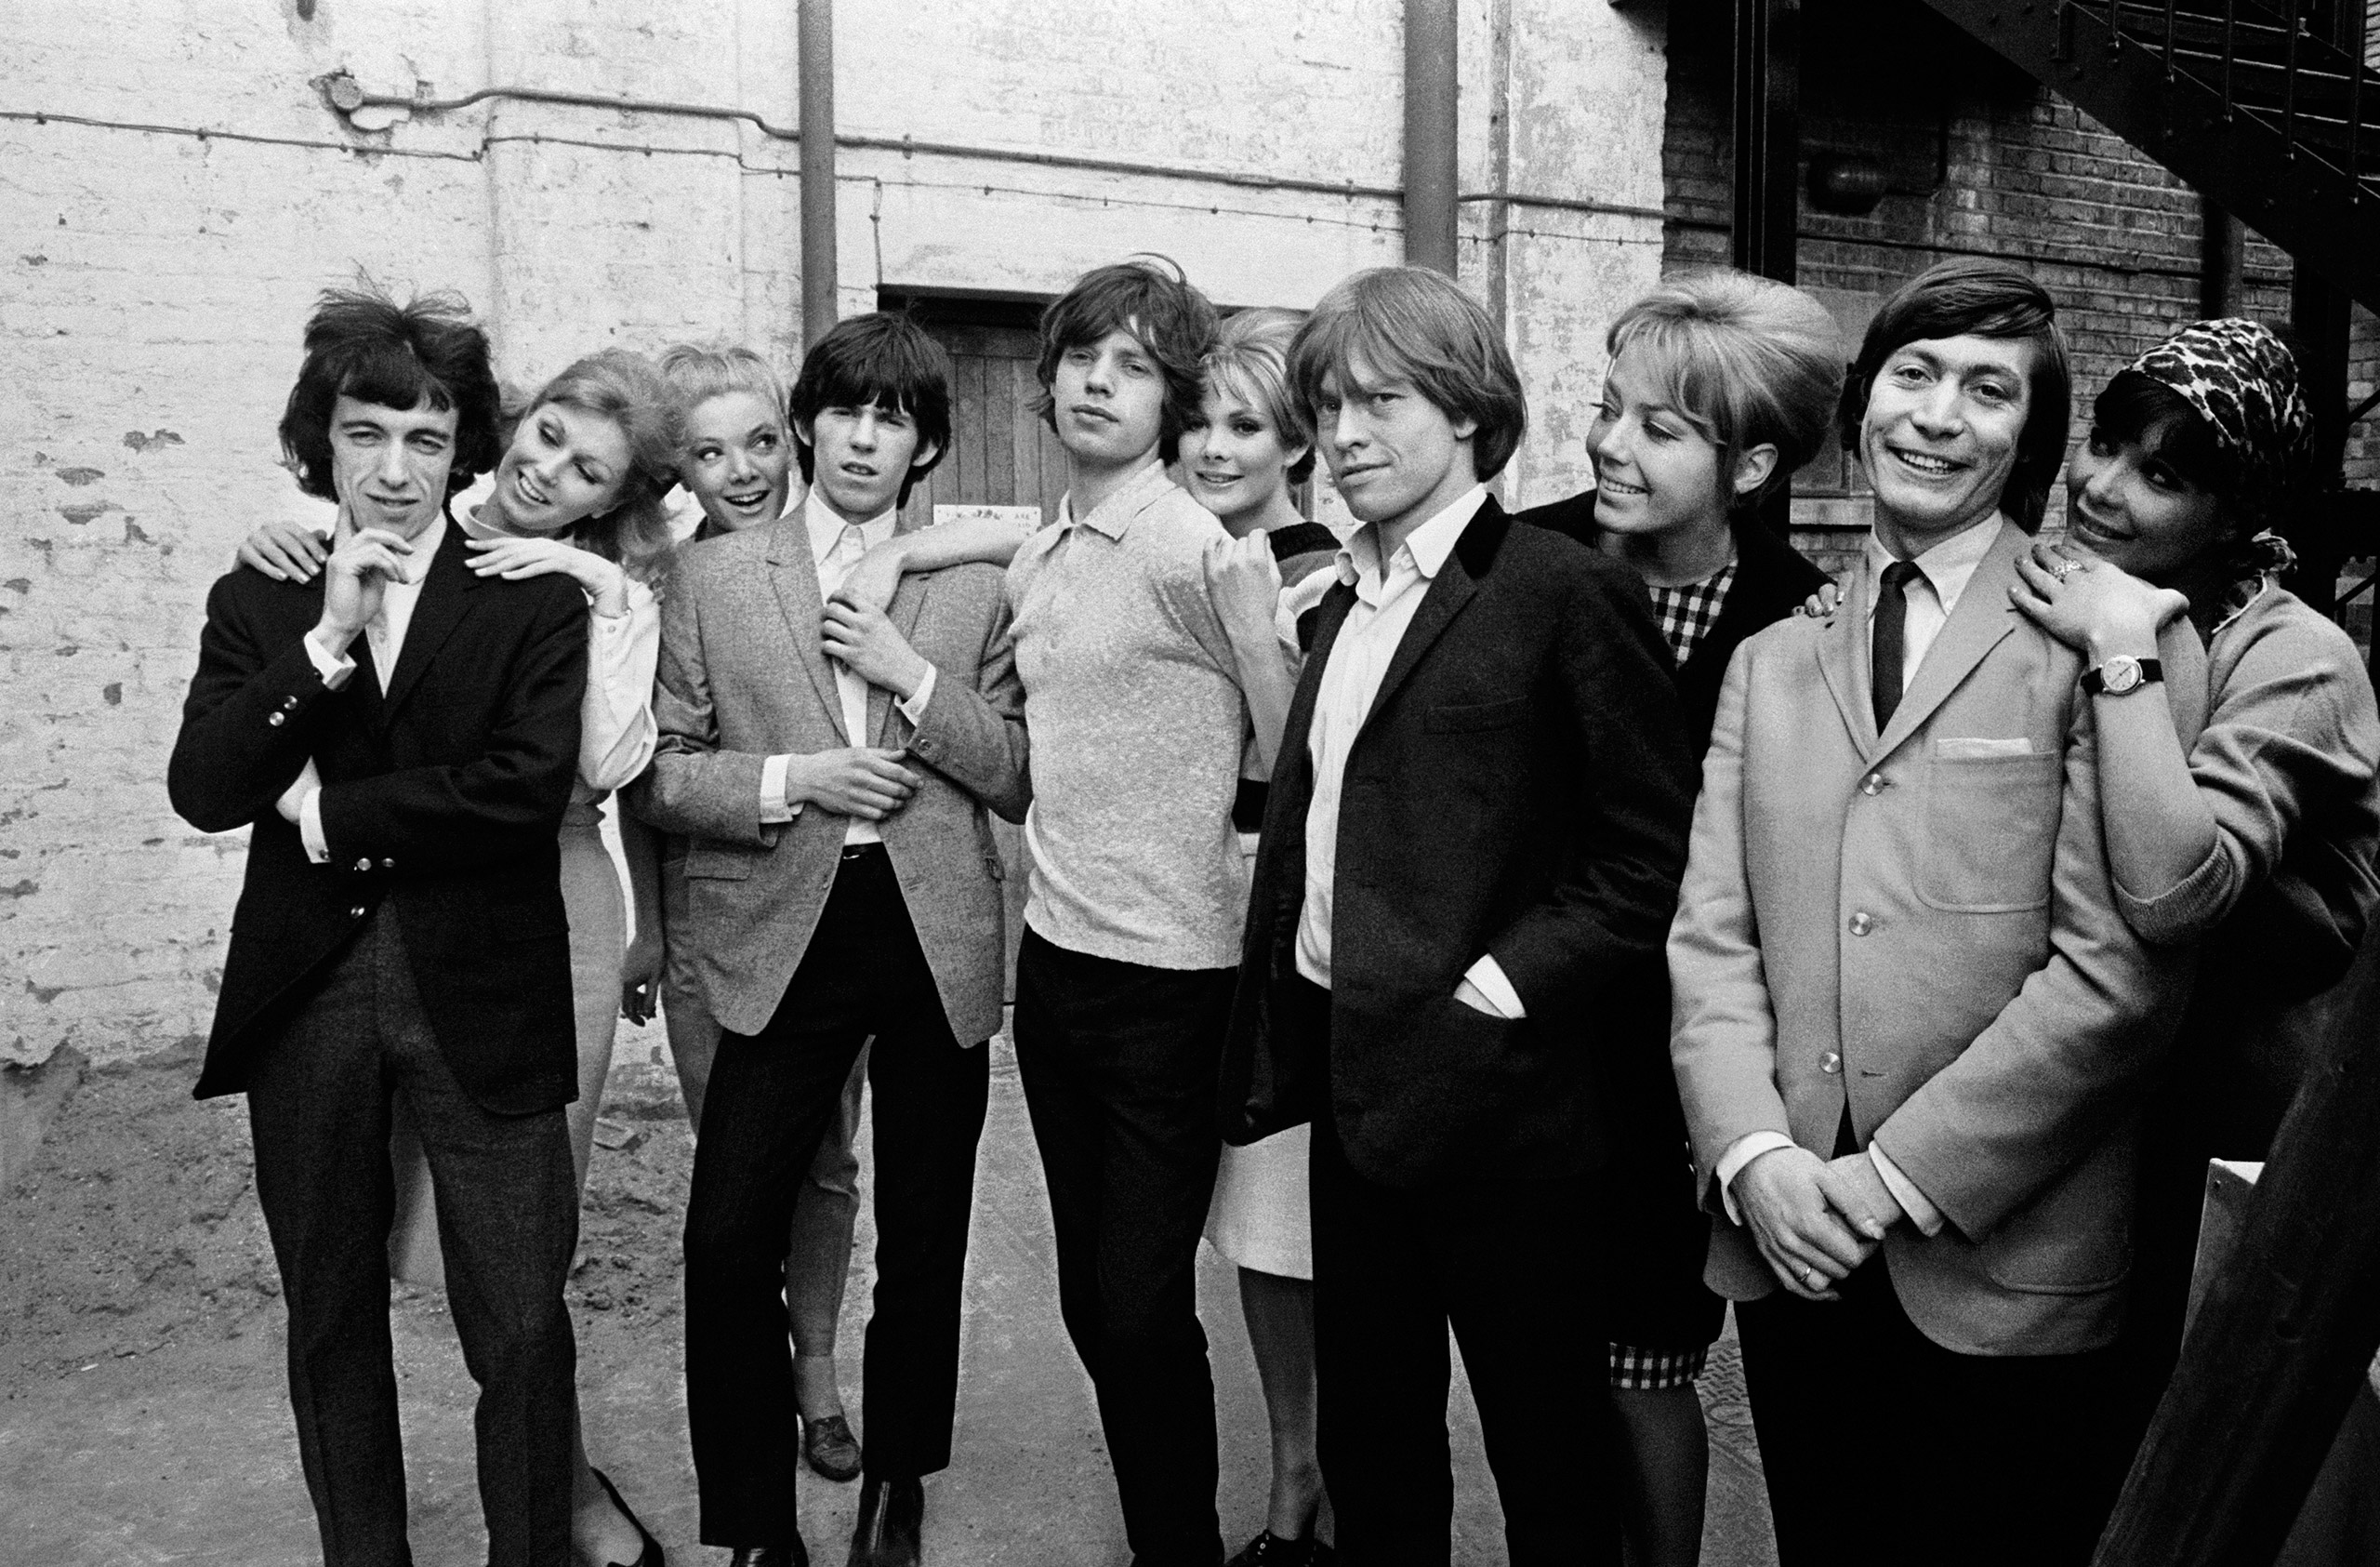 The Rolling Stones posing with a group of women during rehearsals for ABC's 'Thank Your Lucky Stars' TV pop music show at Teddington Studios, London, November 11, 1964.